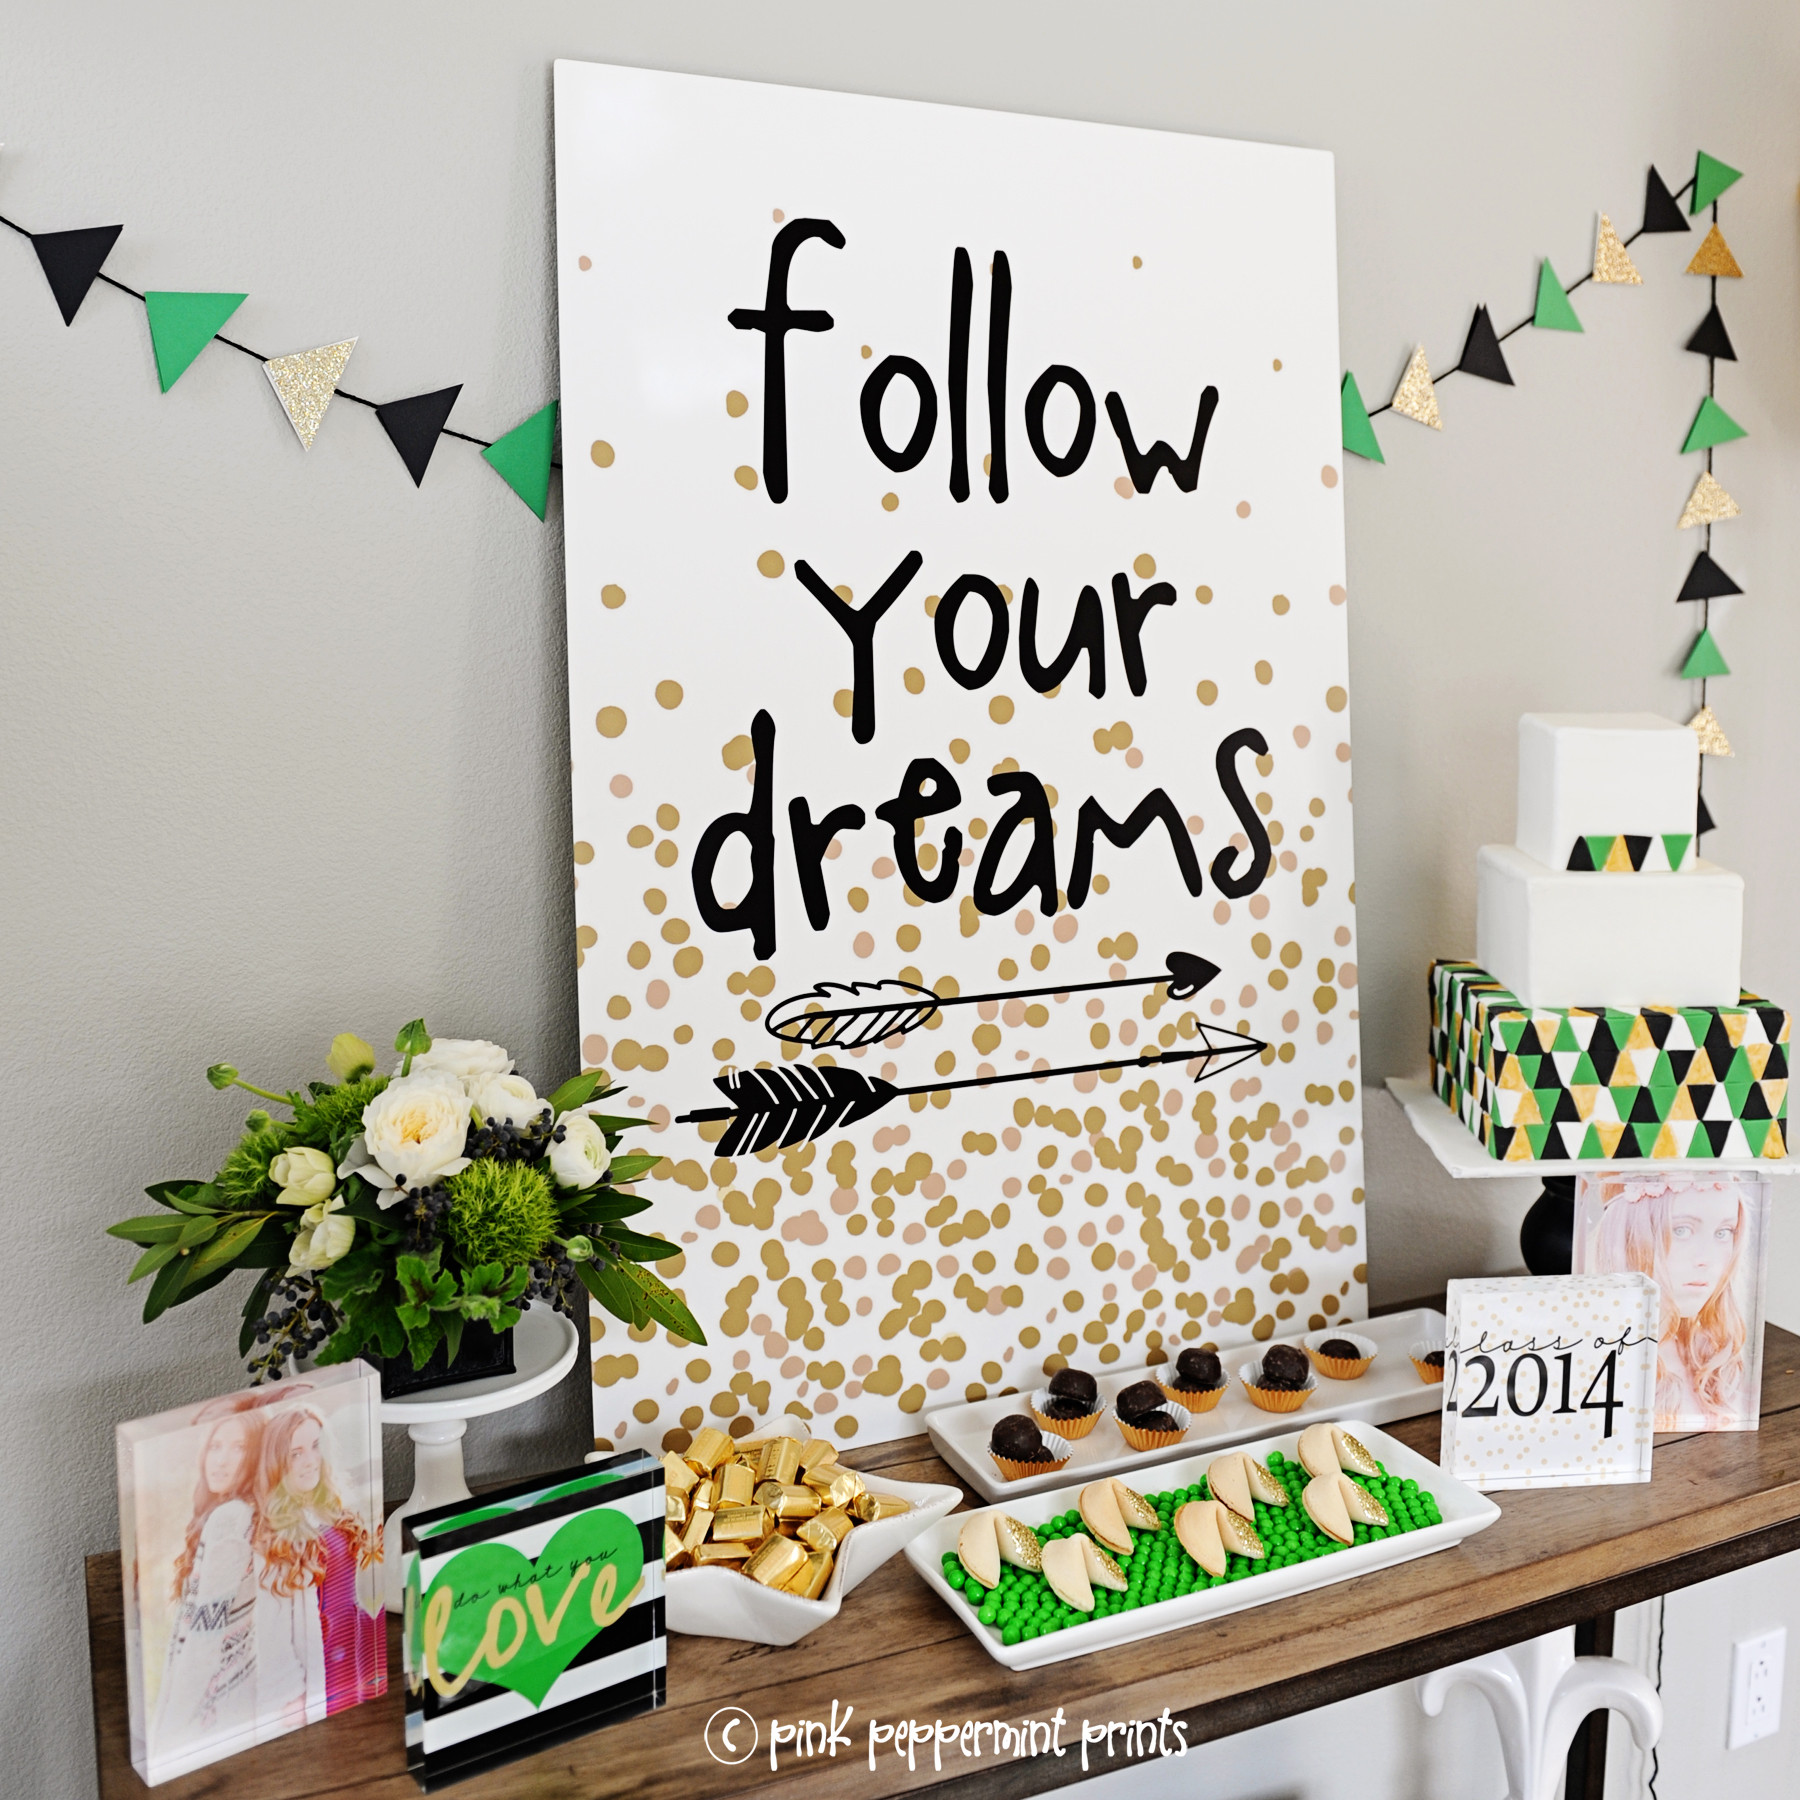 College Graduation Party Themes And Ideas
 FUN High School Graduation Party Ideas & Decorations